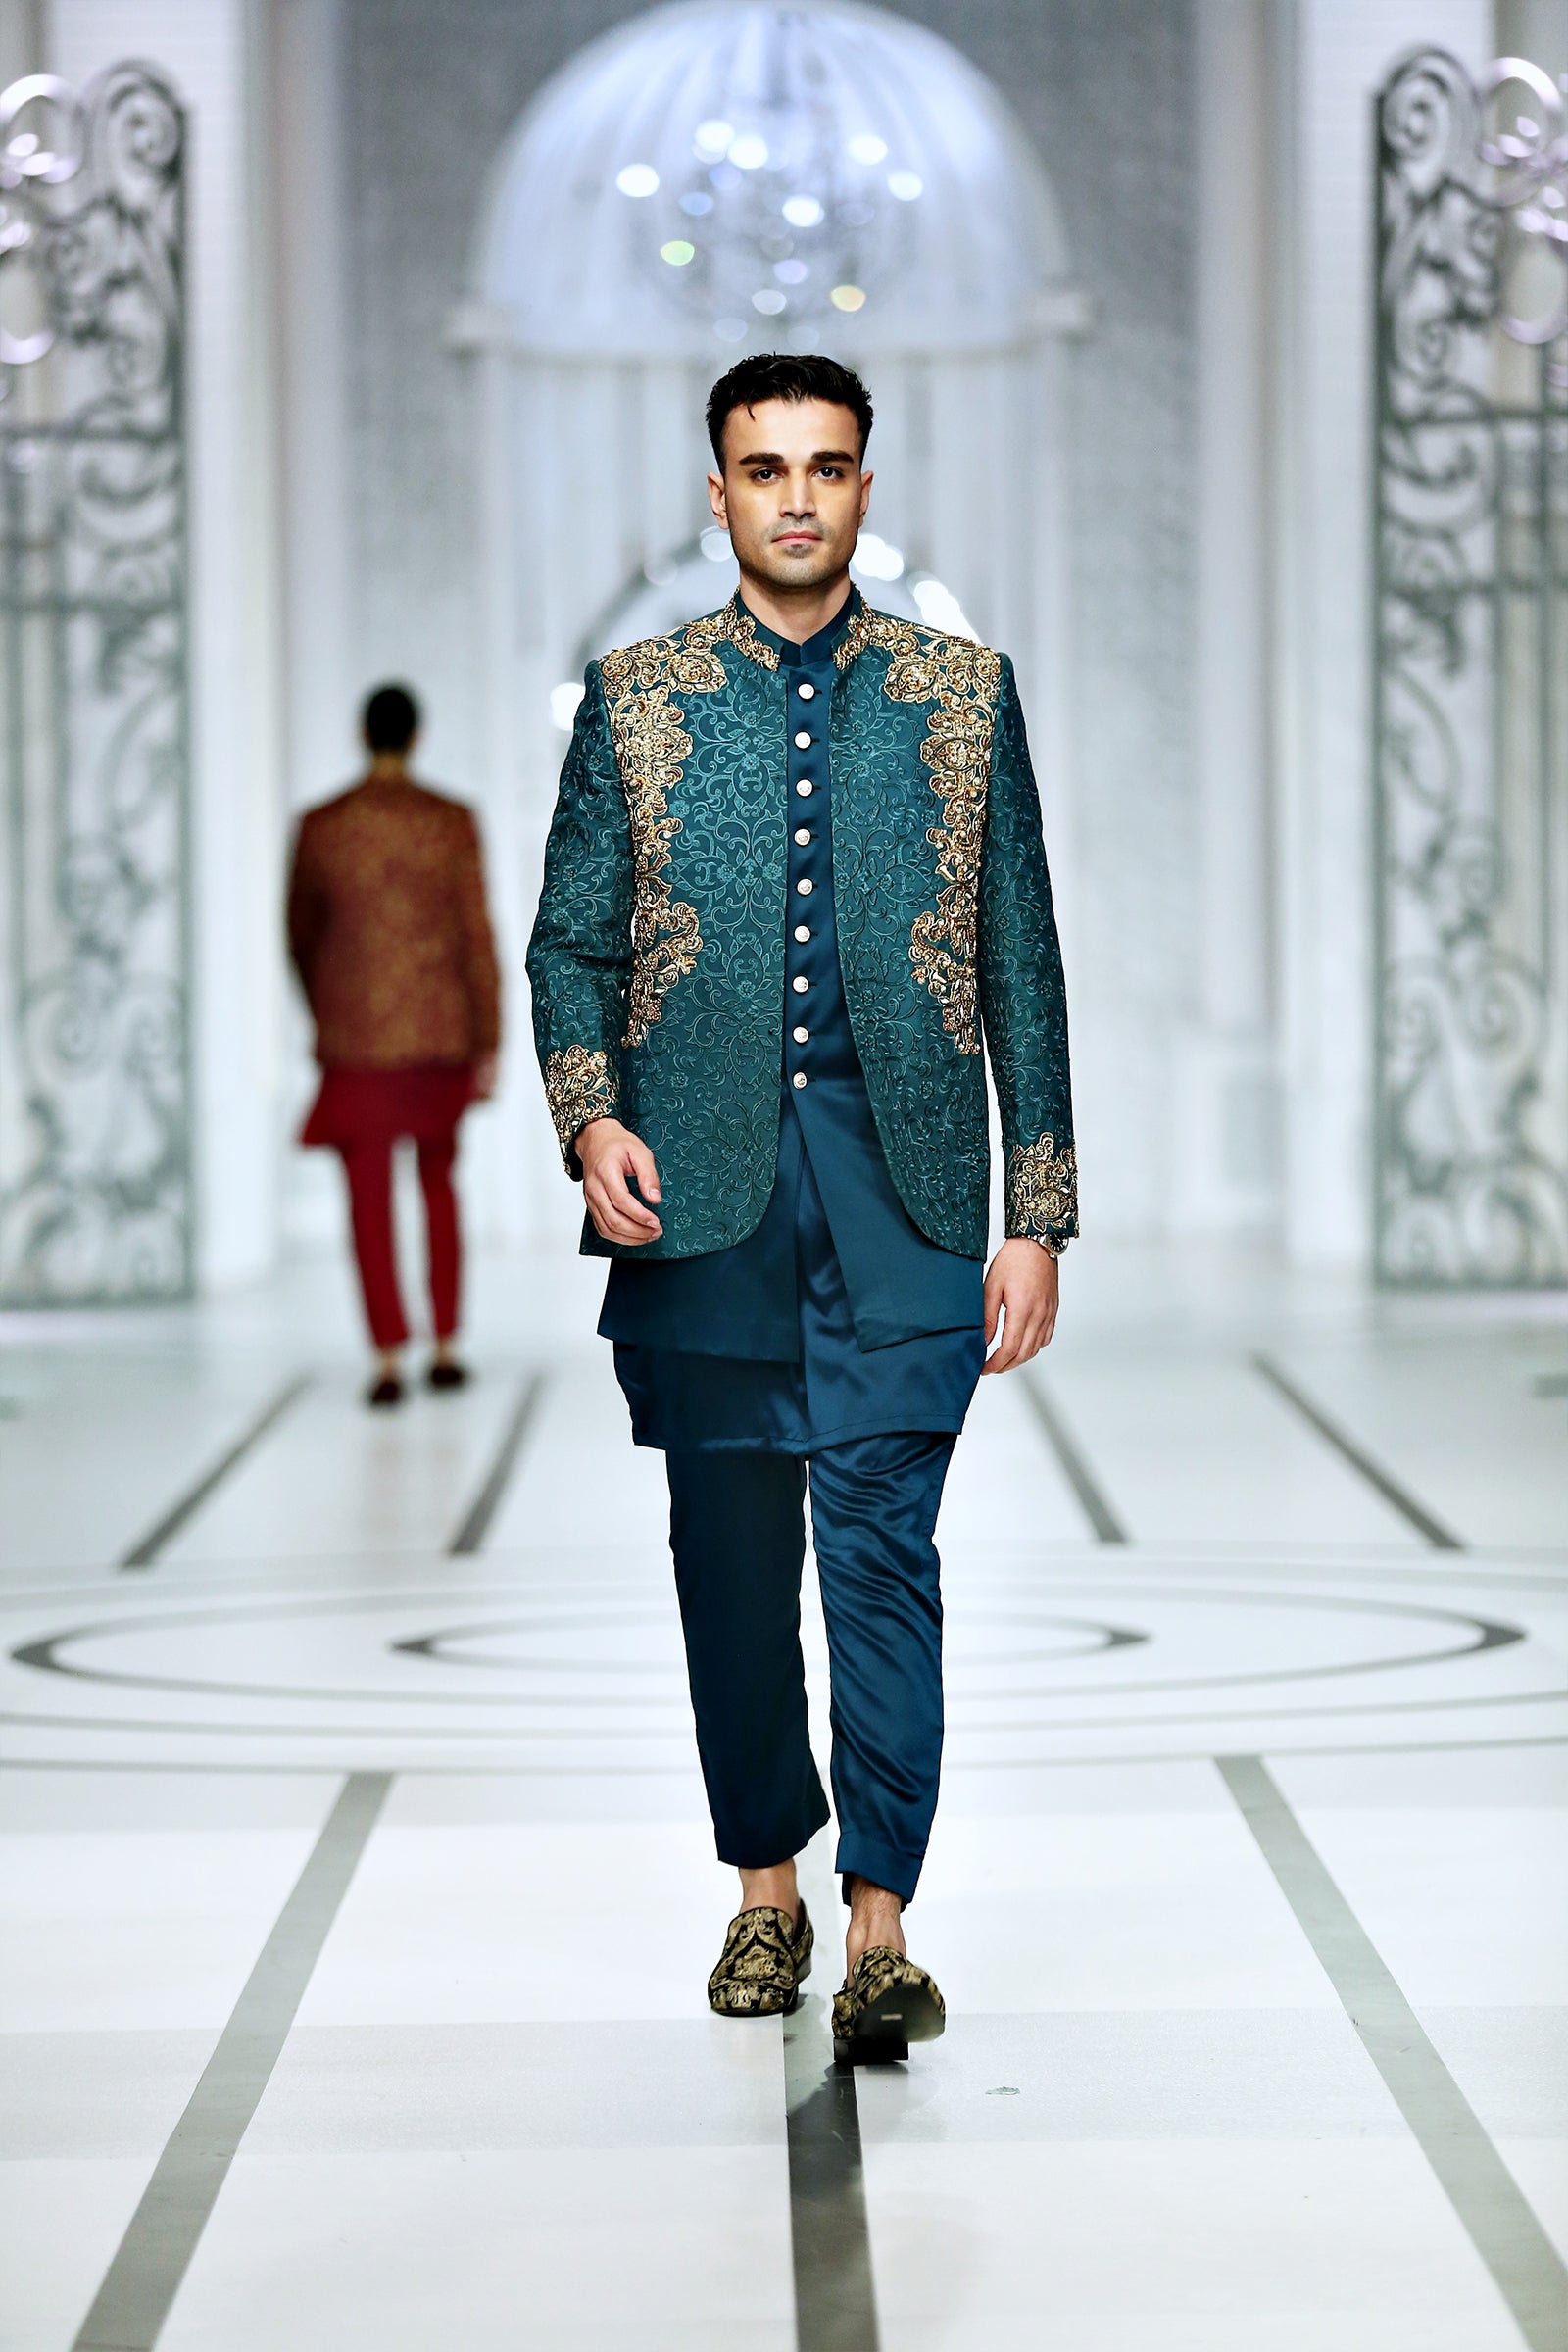 Teal Green Prince Coat by BCW PC 48 - Exquisite Design with Kora Daka Work and Inner Waist Coat